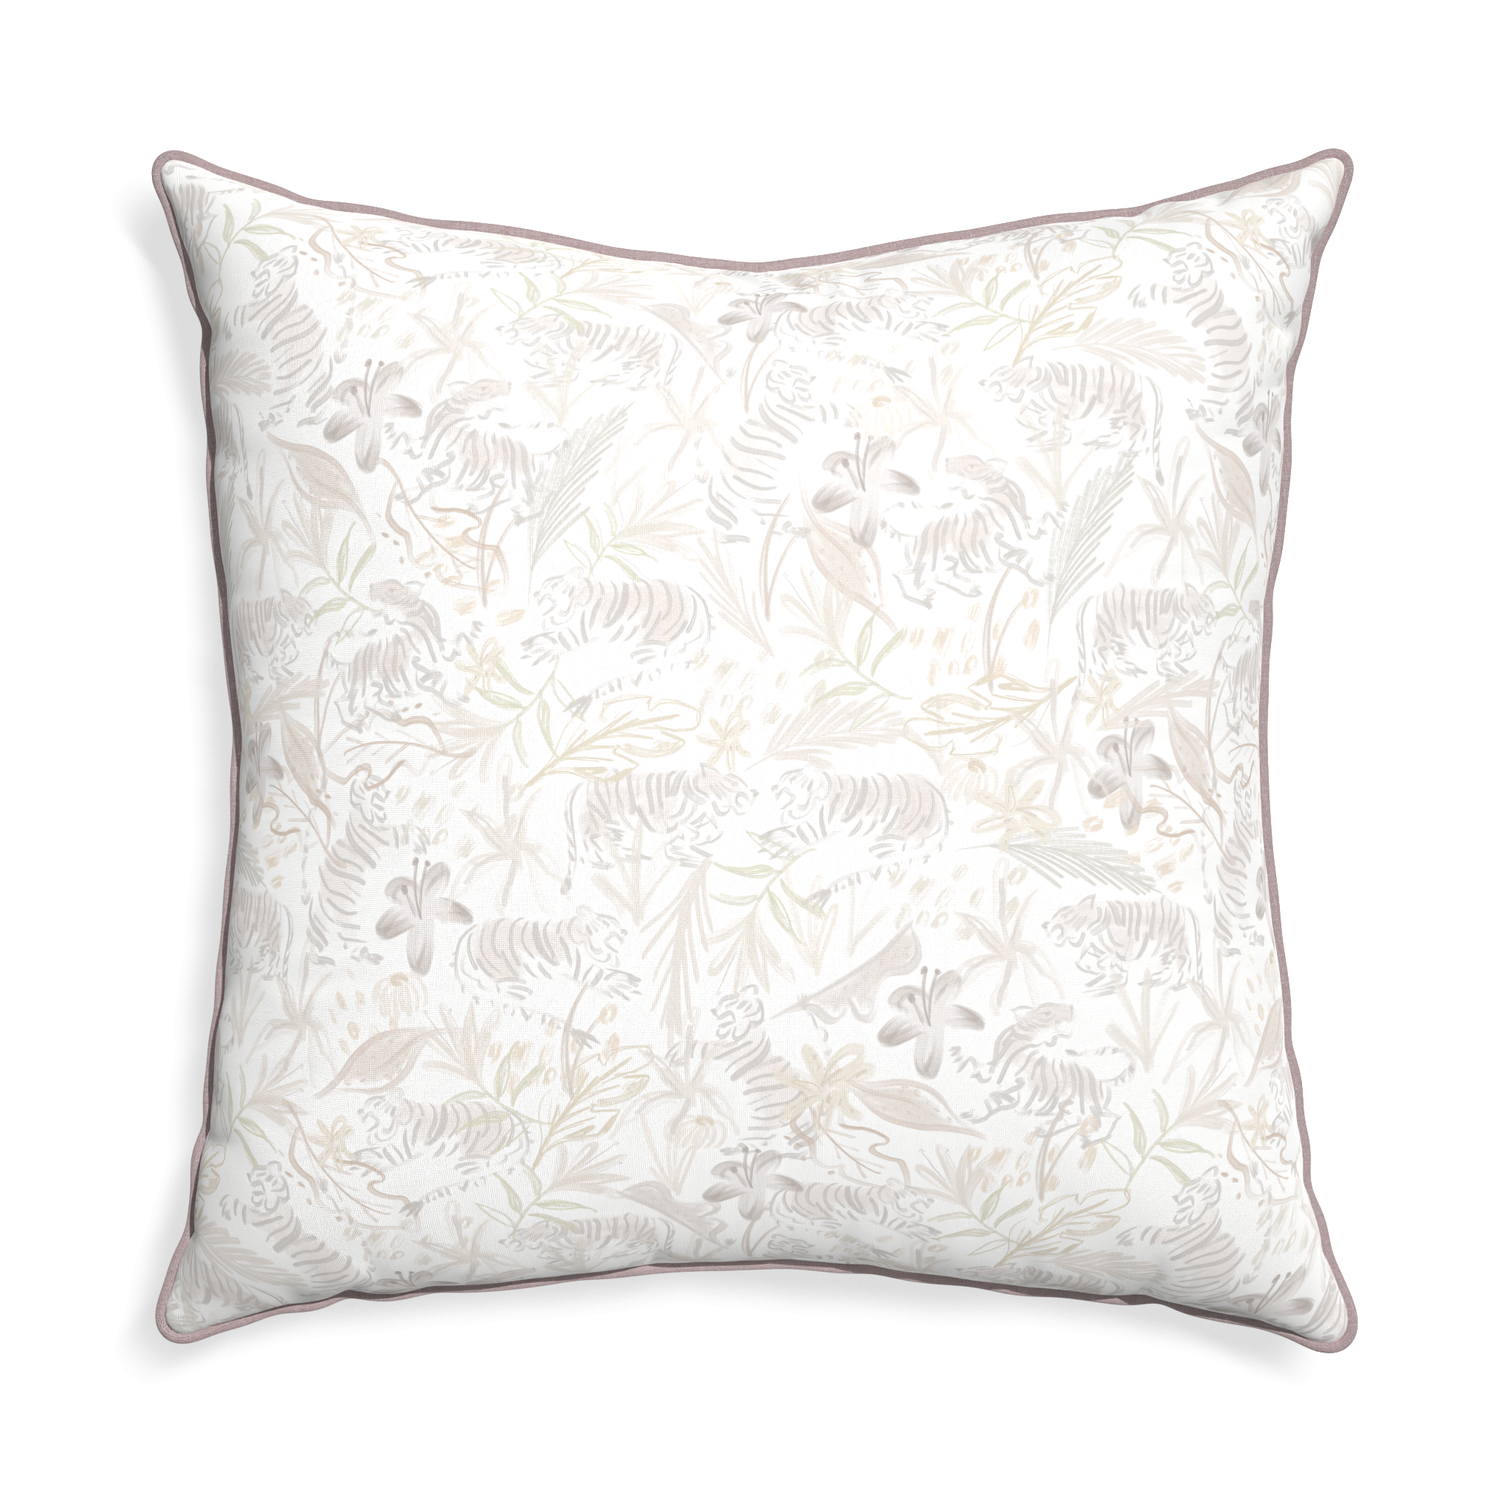 Euro-sham frida sand custom beige chinoiserie tigerpillow with orchid piping on white background